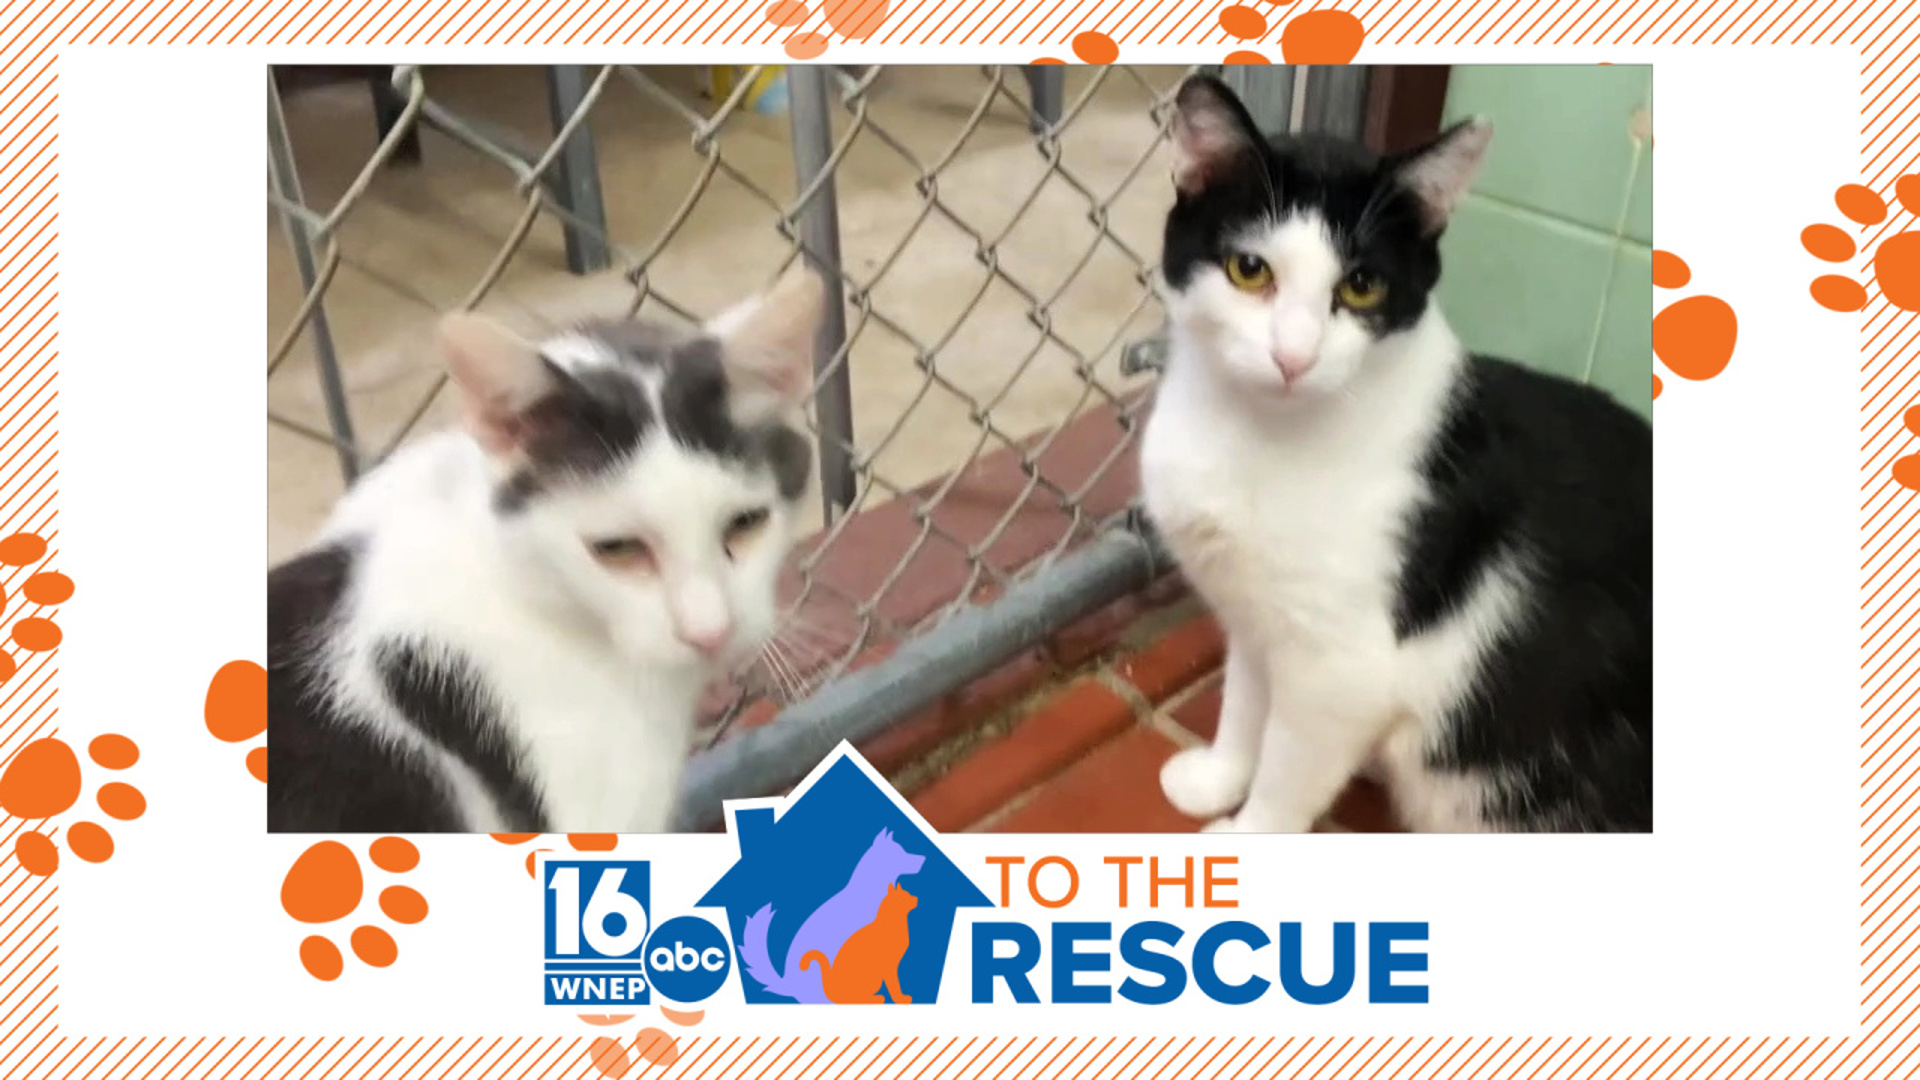 In this week's 16 To The Rescue, we meet a pair of cats rescued from a hoarding situation with more than 20 others, but these two should stay together.